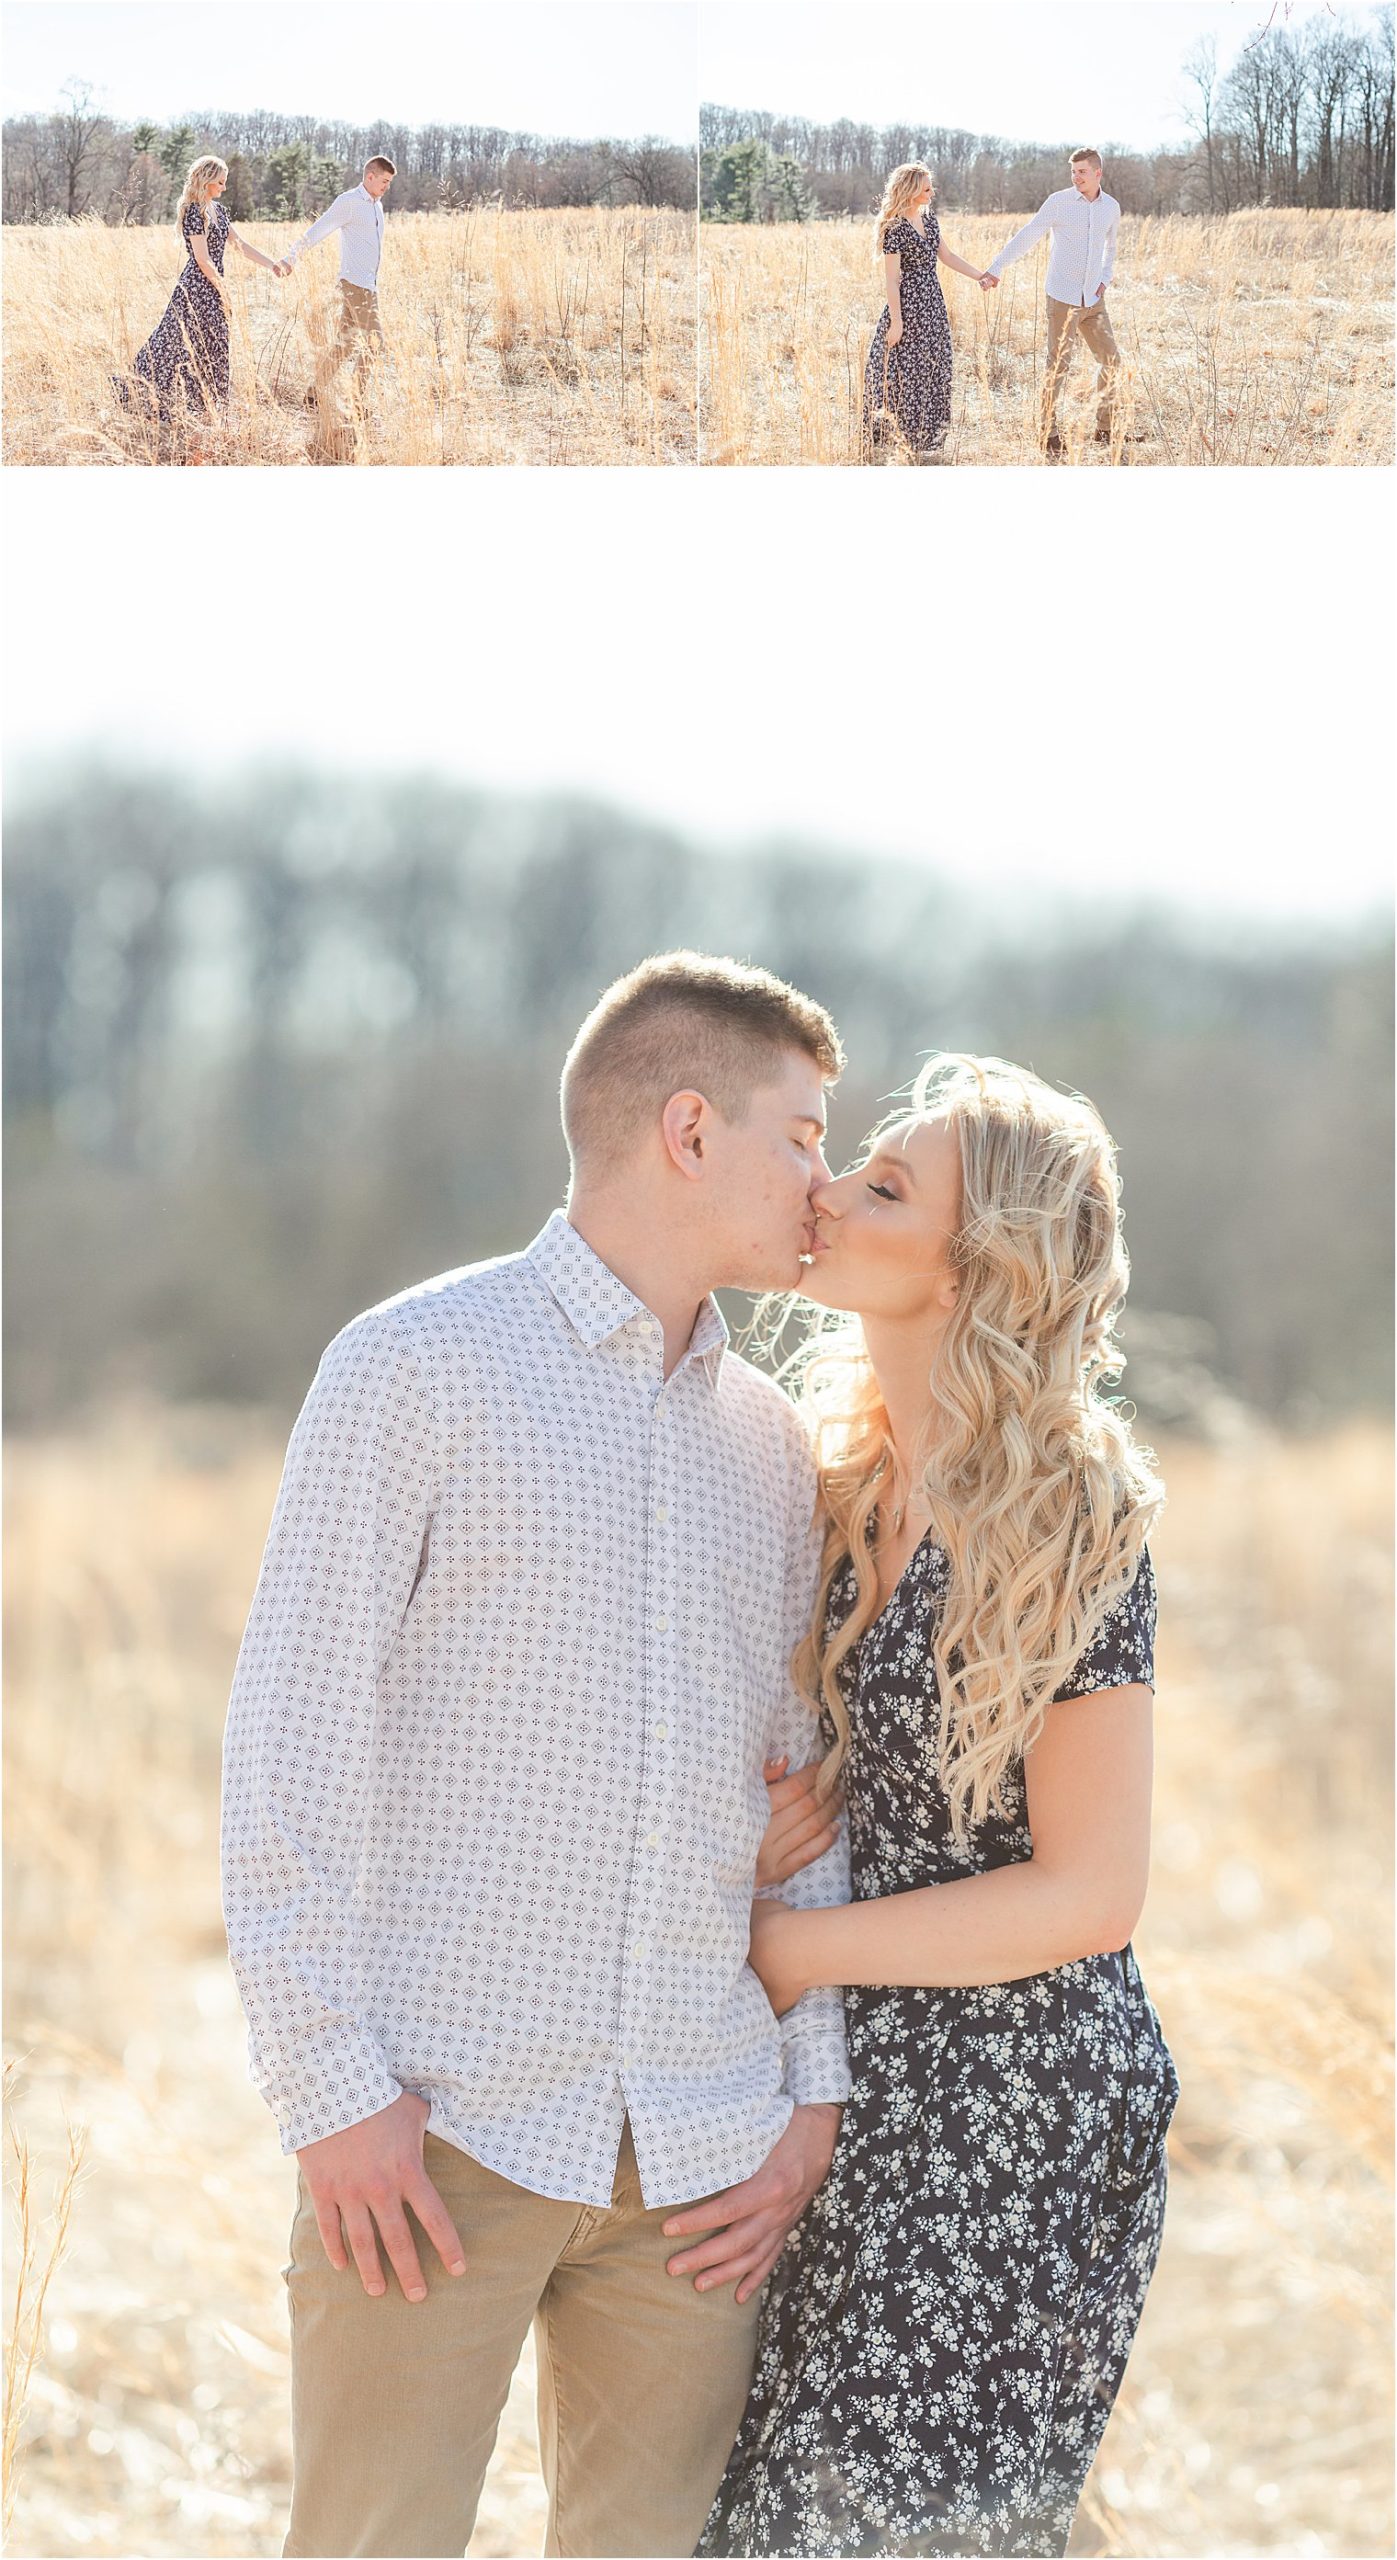 Couple walks through tall grass field and kisses during engagement session